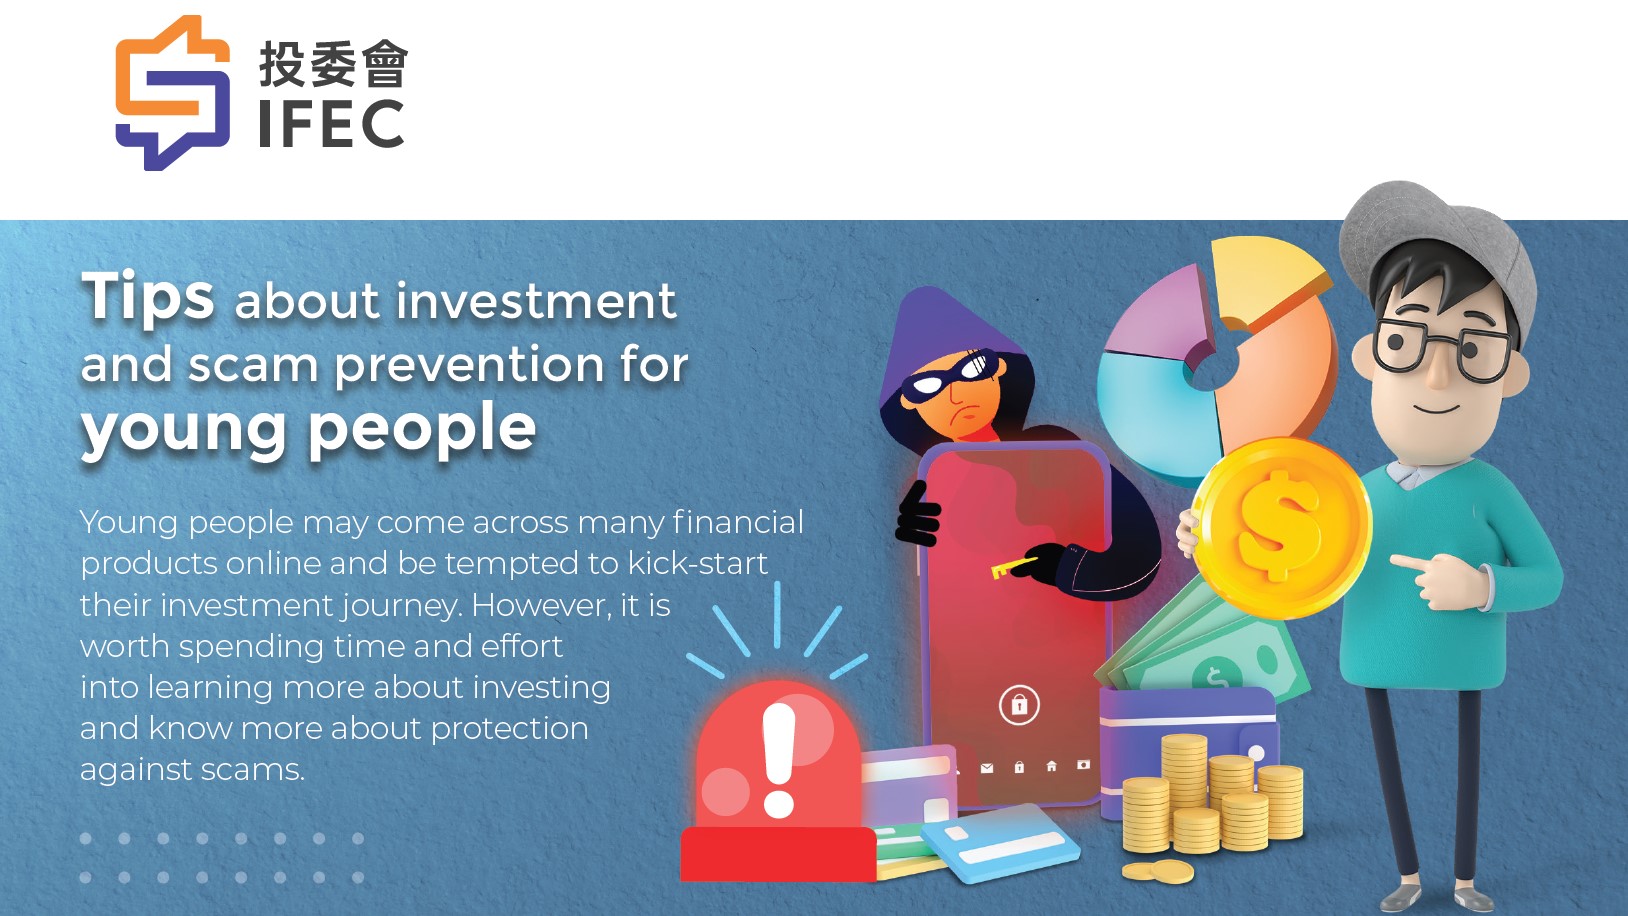 Tips on investment and scam prevention for young people